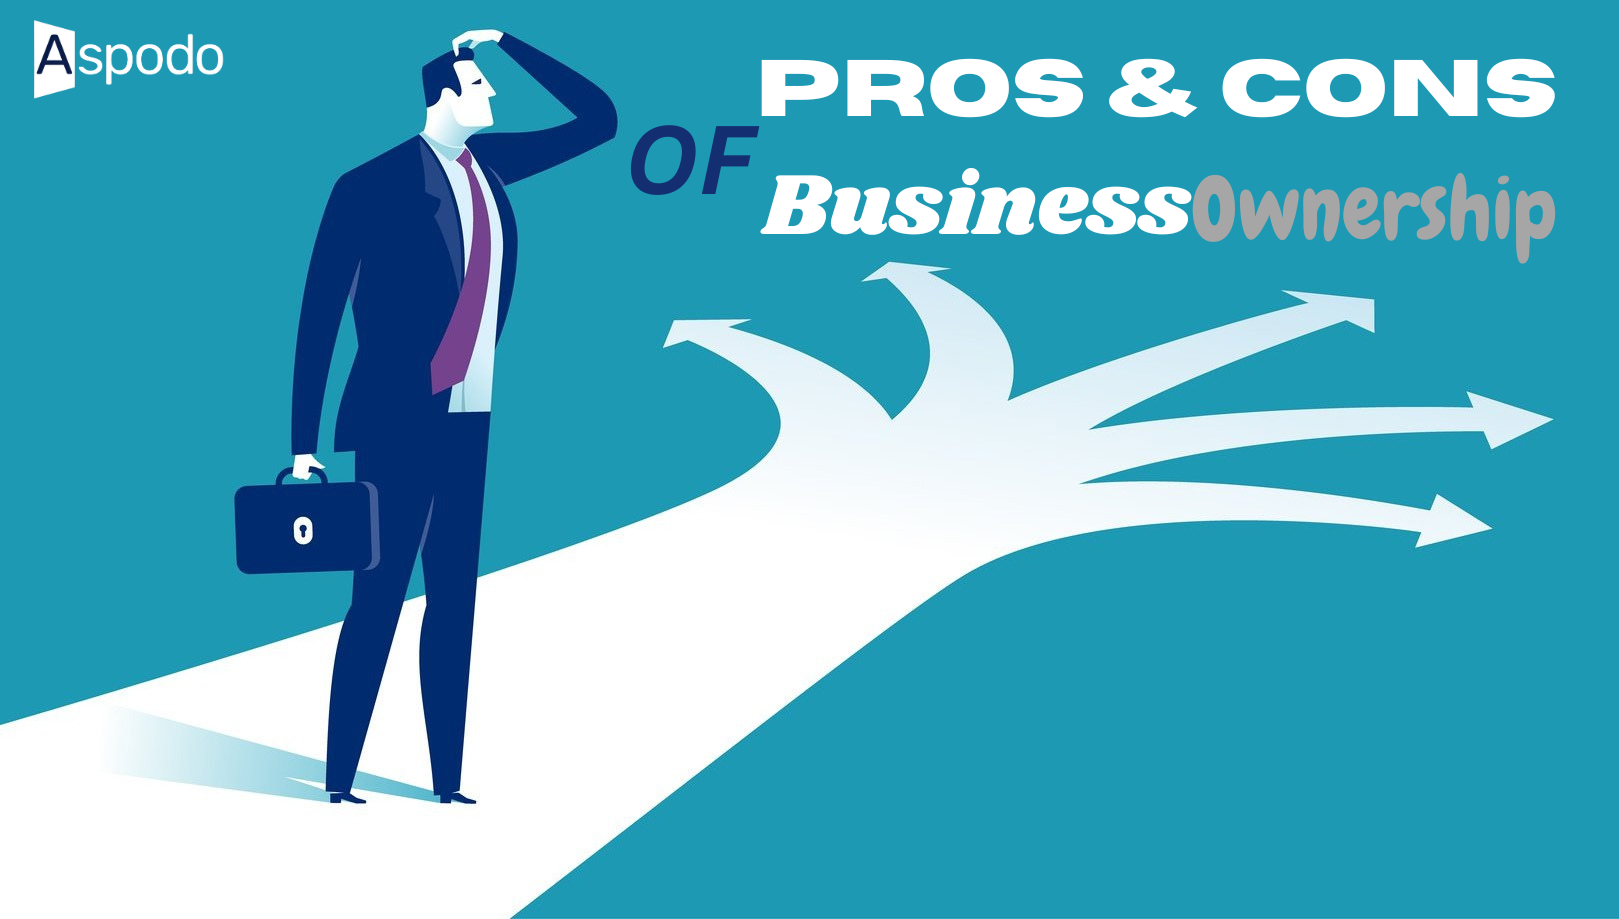 Pros & Cons of Business Ownership